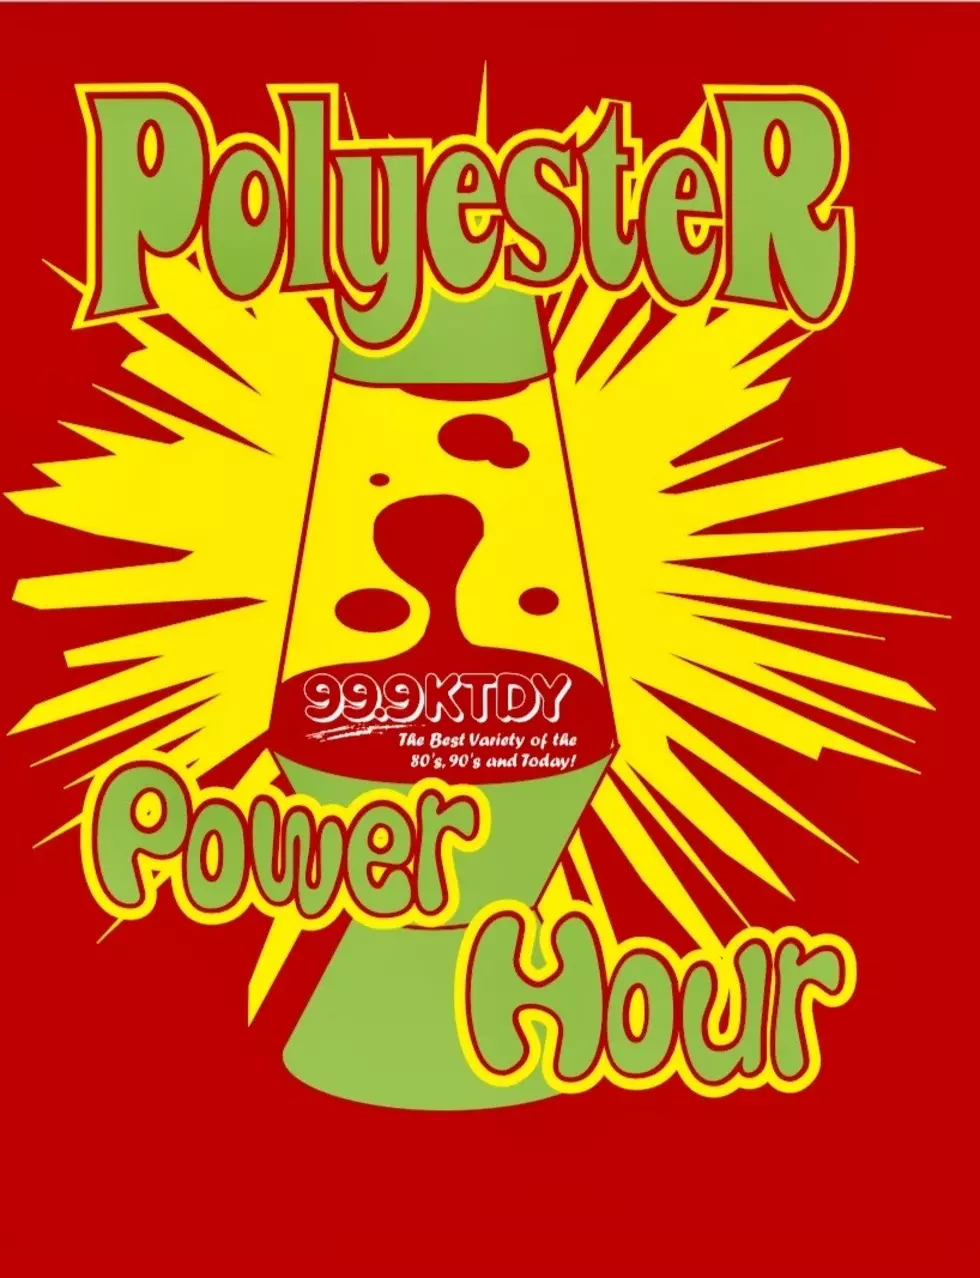 Special July 4th Polyester Power Hour on 99.9 KTDY